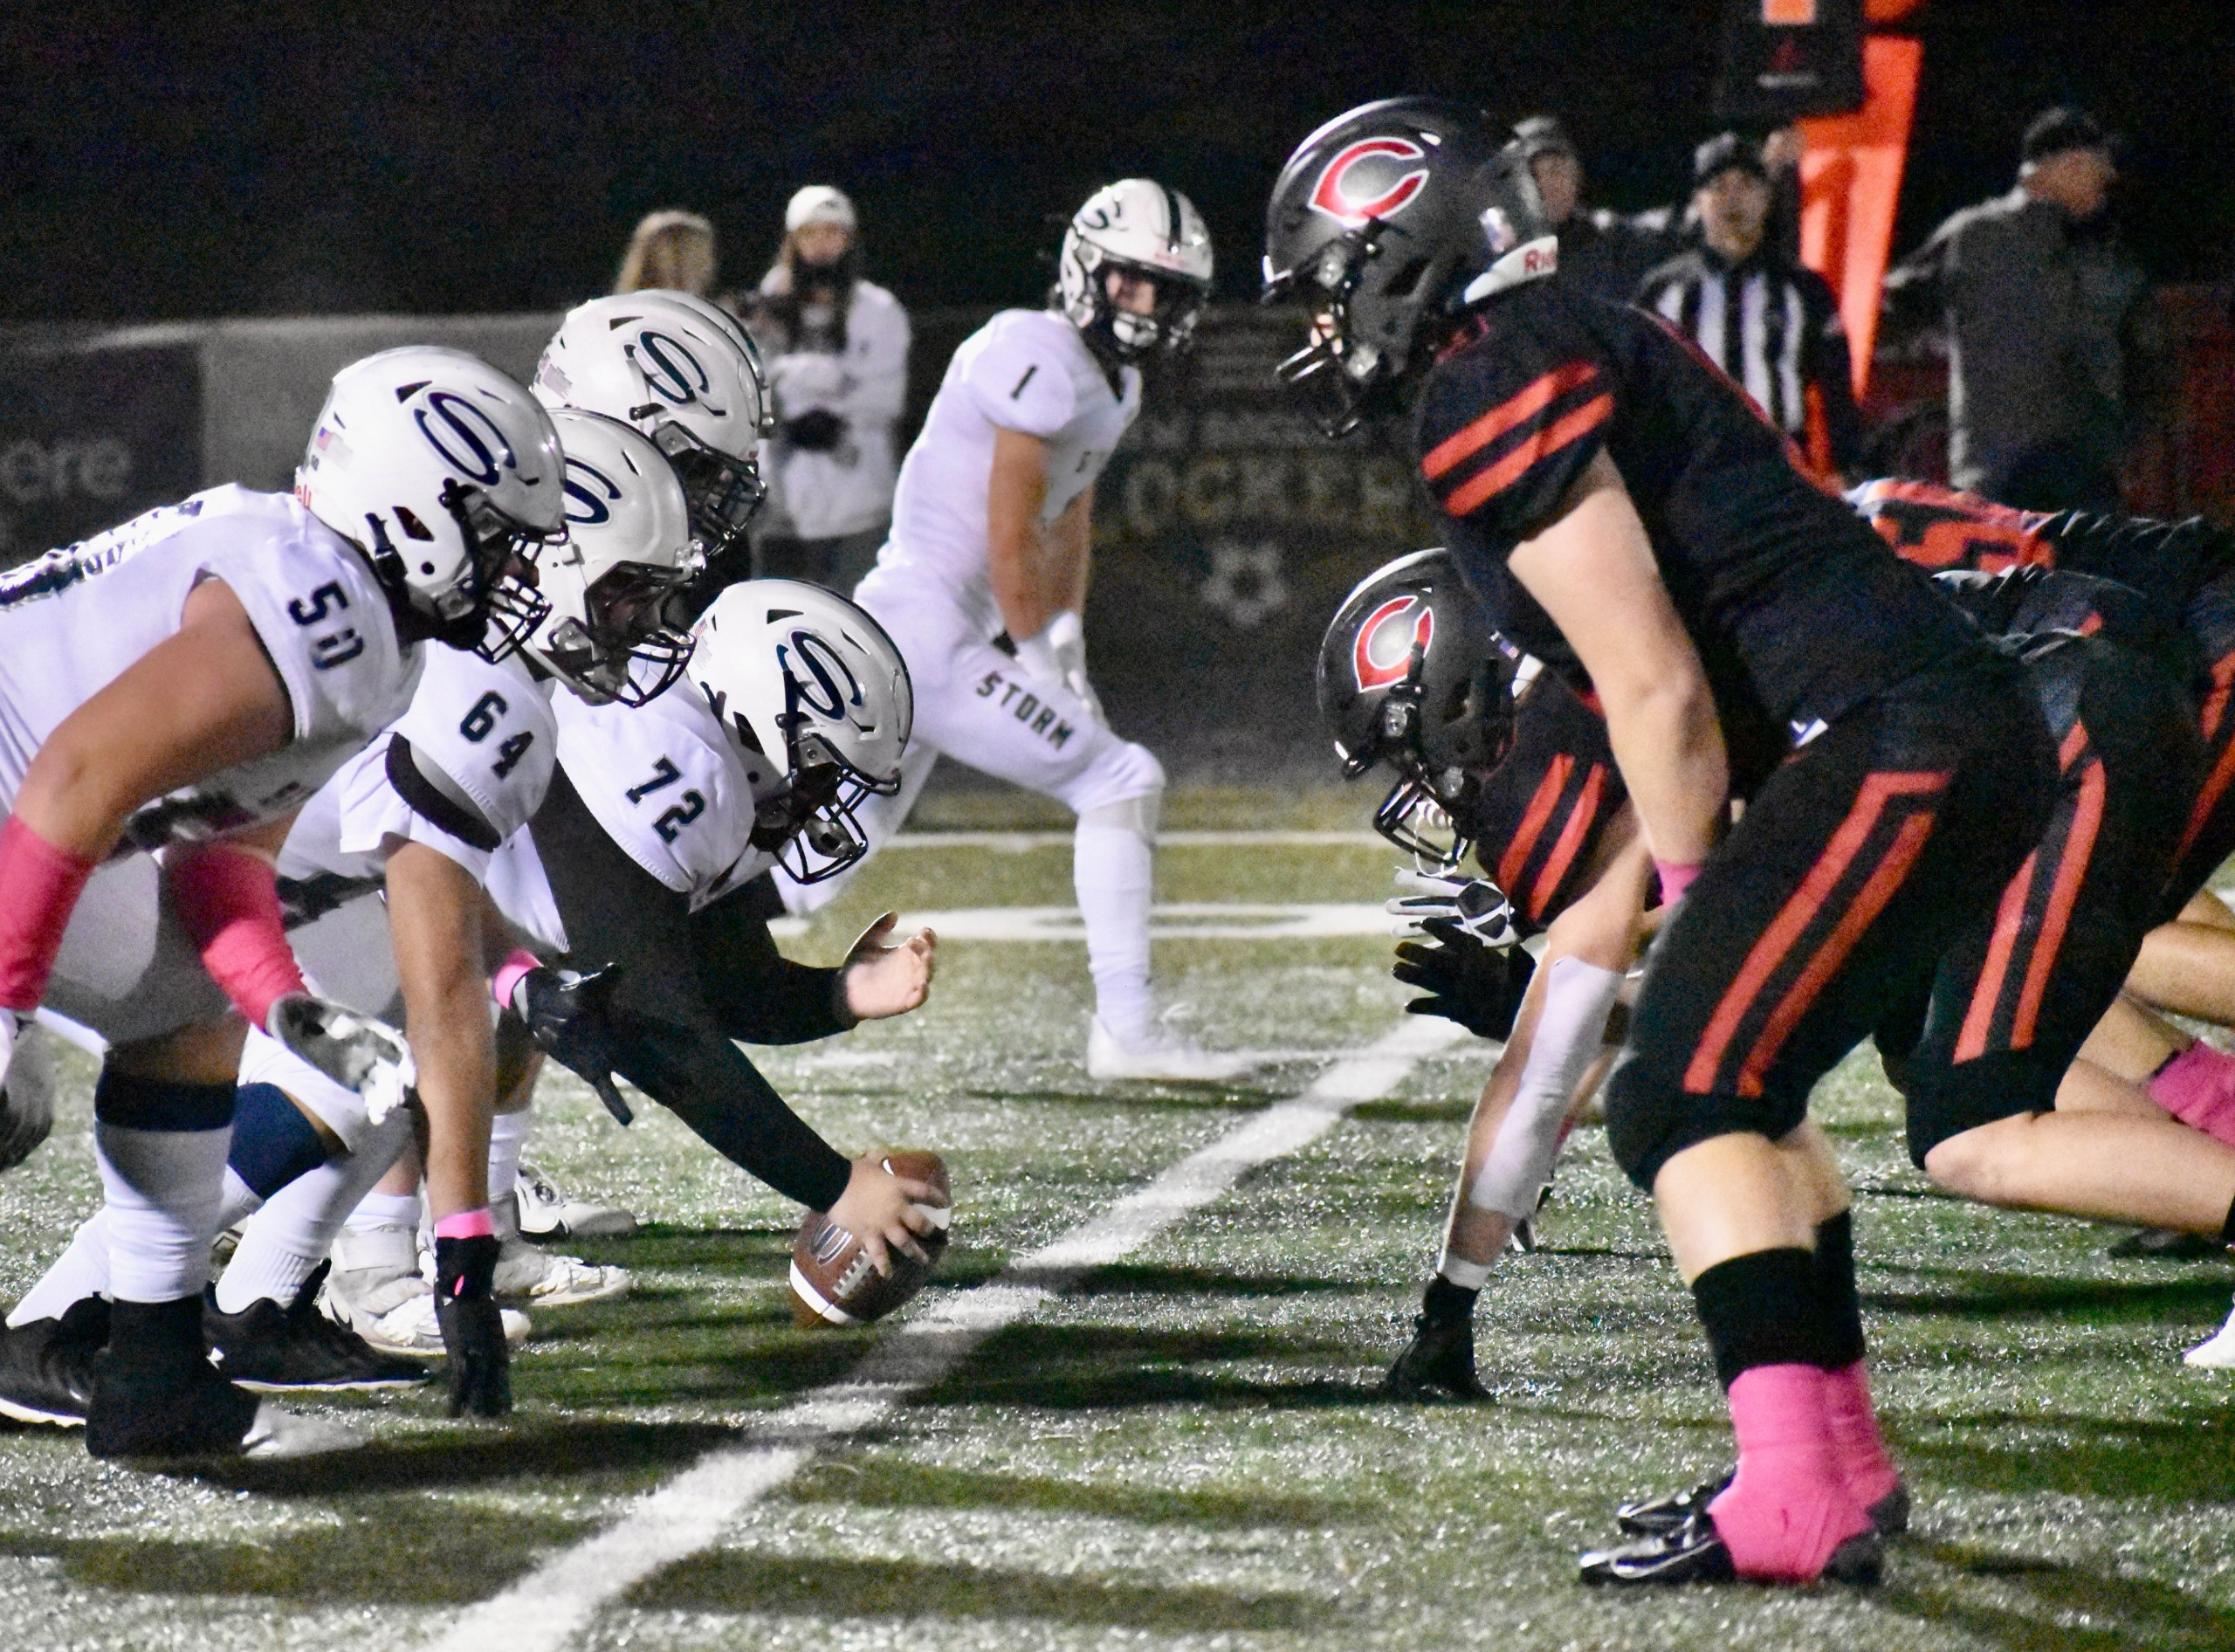 The Camas defense stood tall against Skyview all night Friday, leading the Papermakers to a 17-7 victory at Doc Harris Stadium. Photo courtesy Andy Buhler/SB Live